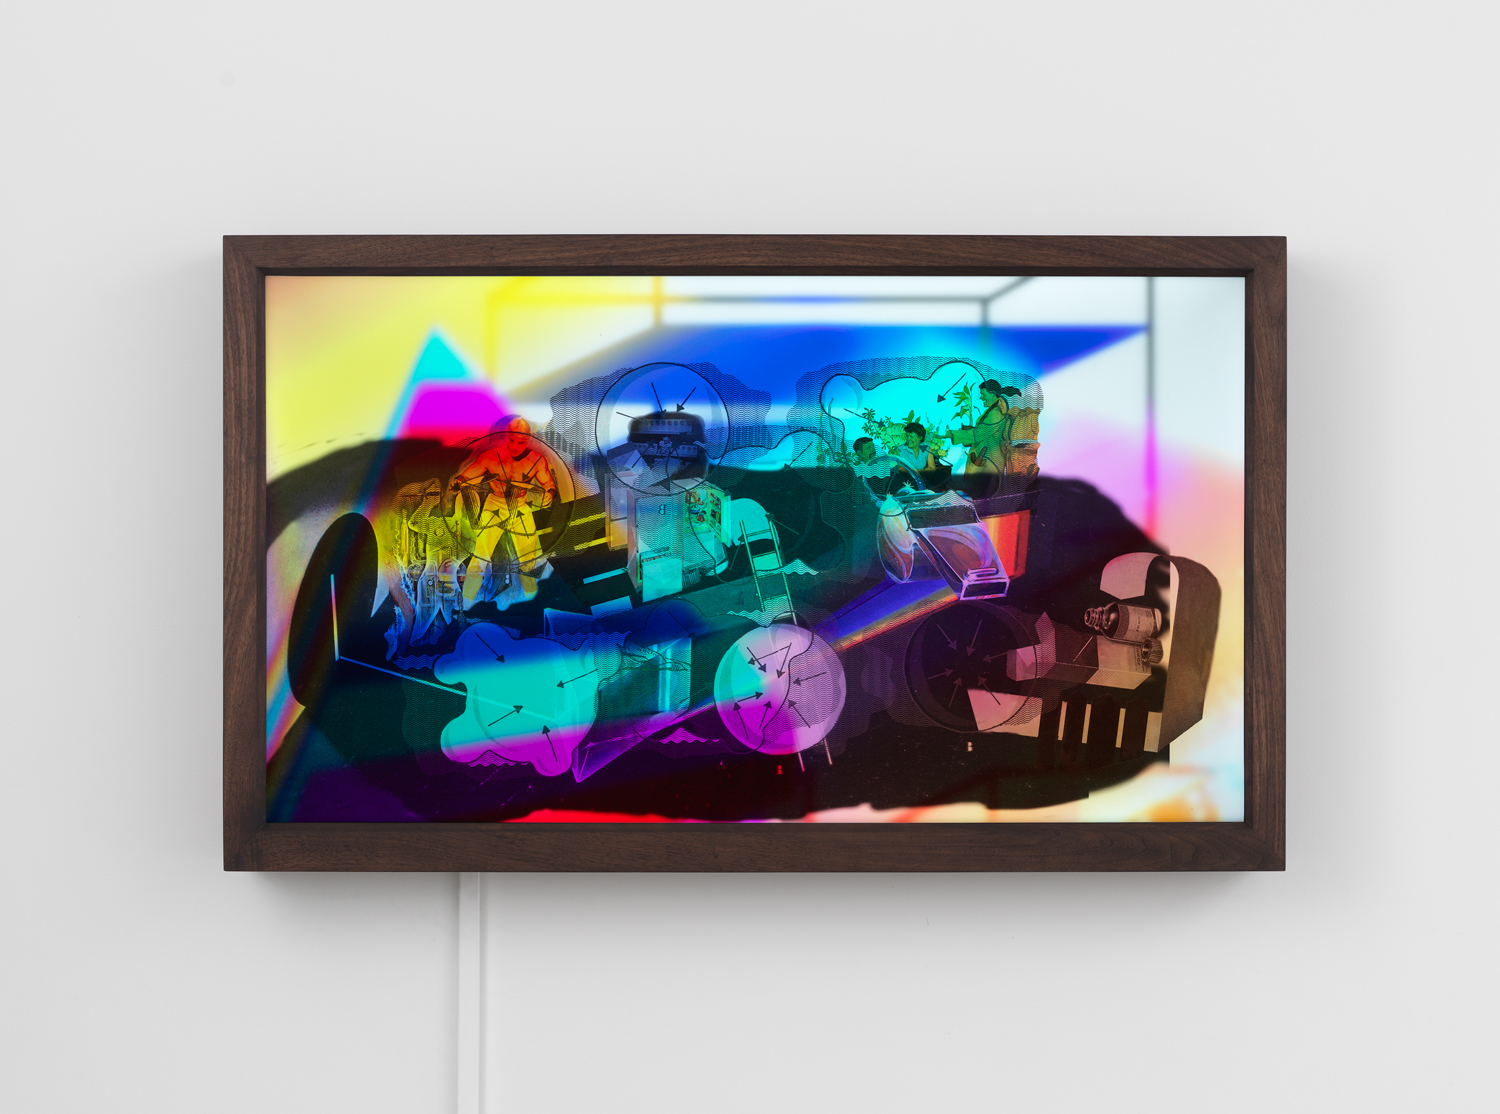 Jibade-Khalil Huffman, A Void, 2020, Transparency in lightbox with flatscreen monitor, looping video, 28.19h x 46.25w x 5.63d in.